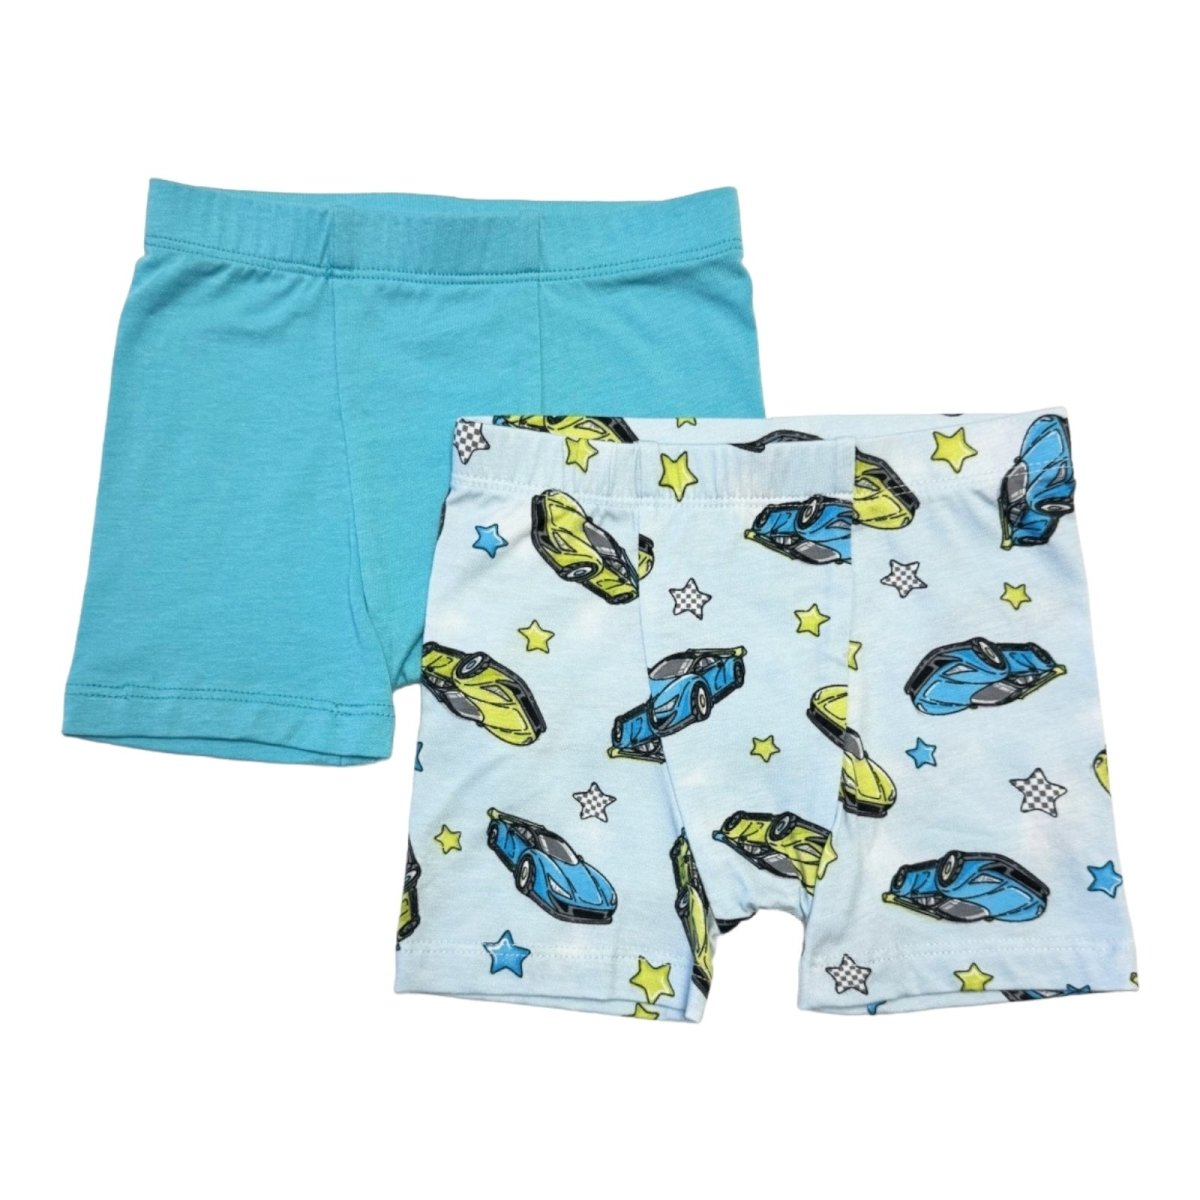 SUPER SONIC CARS 2 PACK BOXERS - ESME